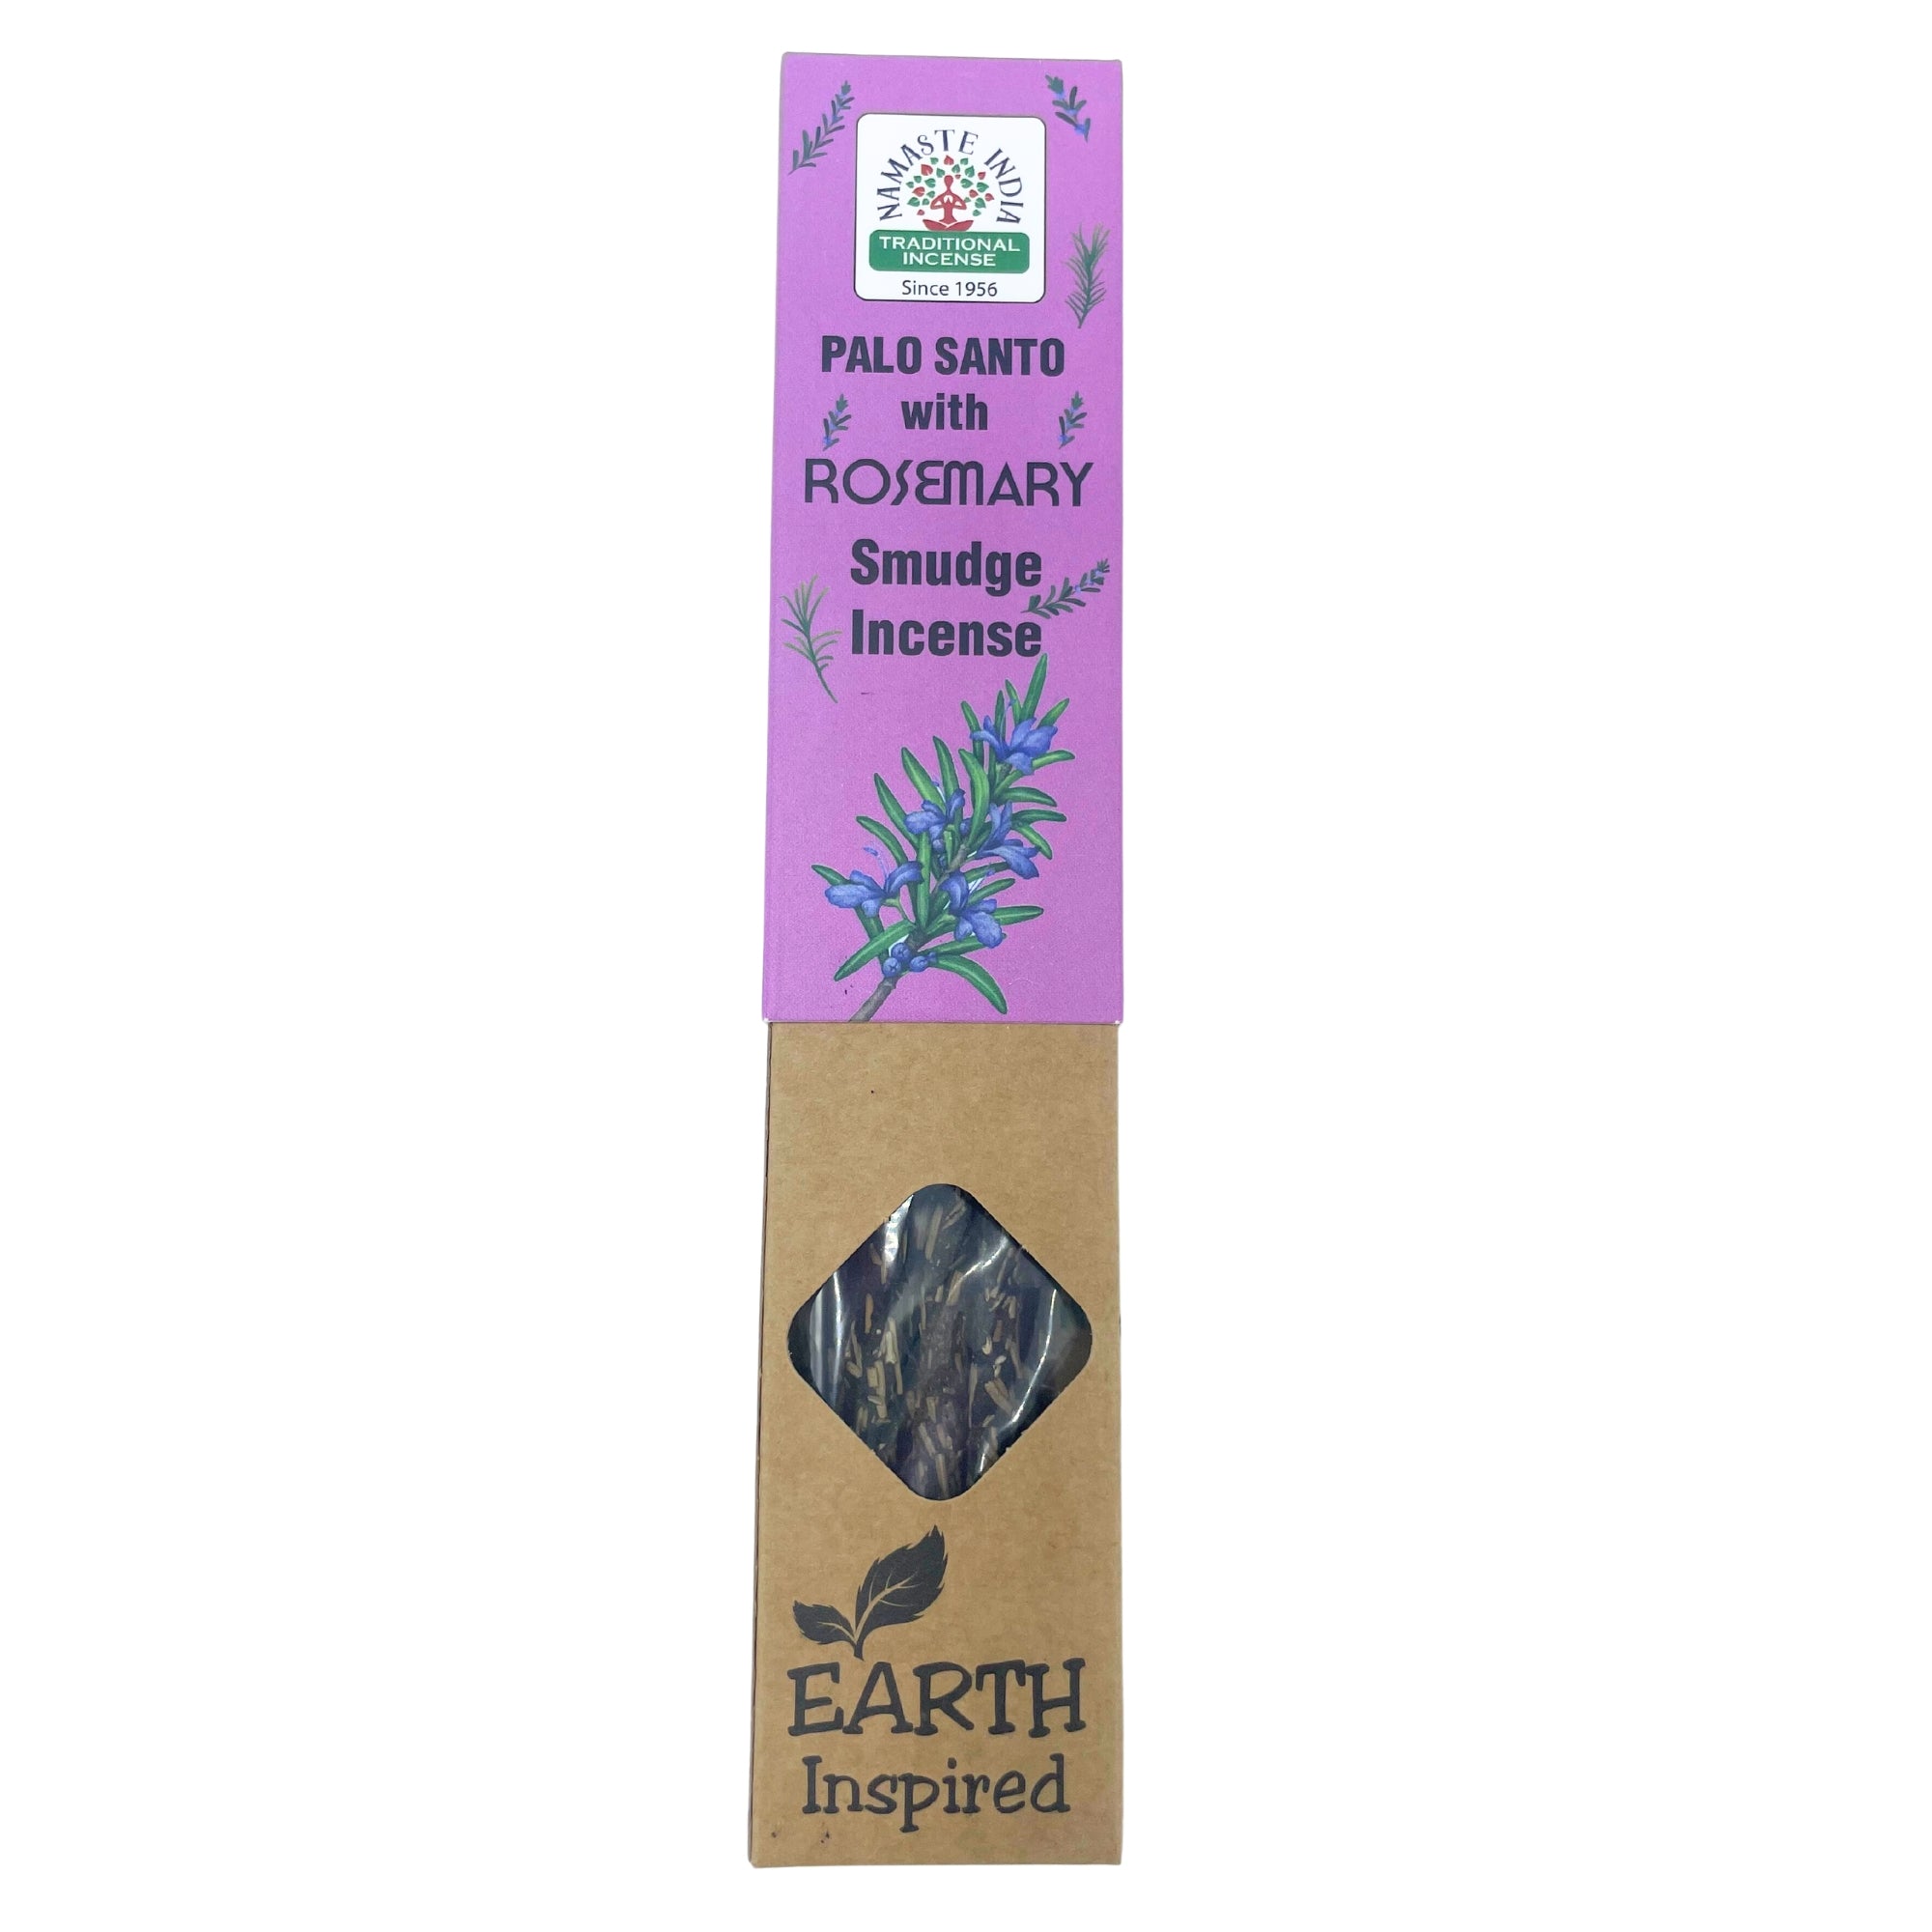 View Earth Inspired Smudge Incense Rosemary information